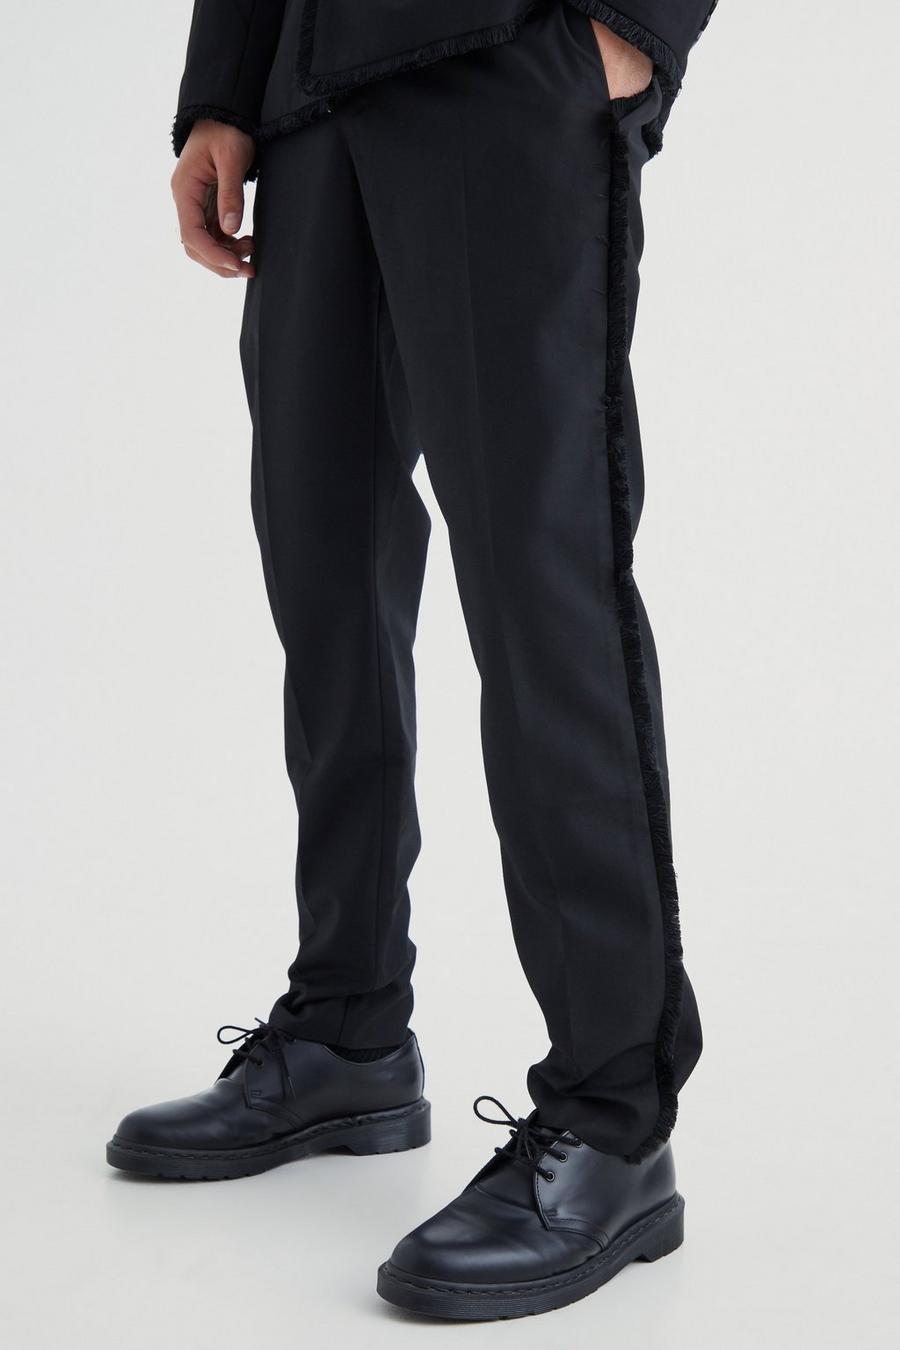 Black Slim Fit Smart Trousers With Distressing